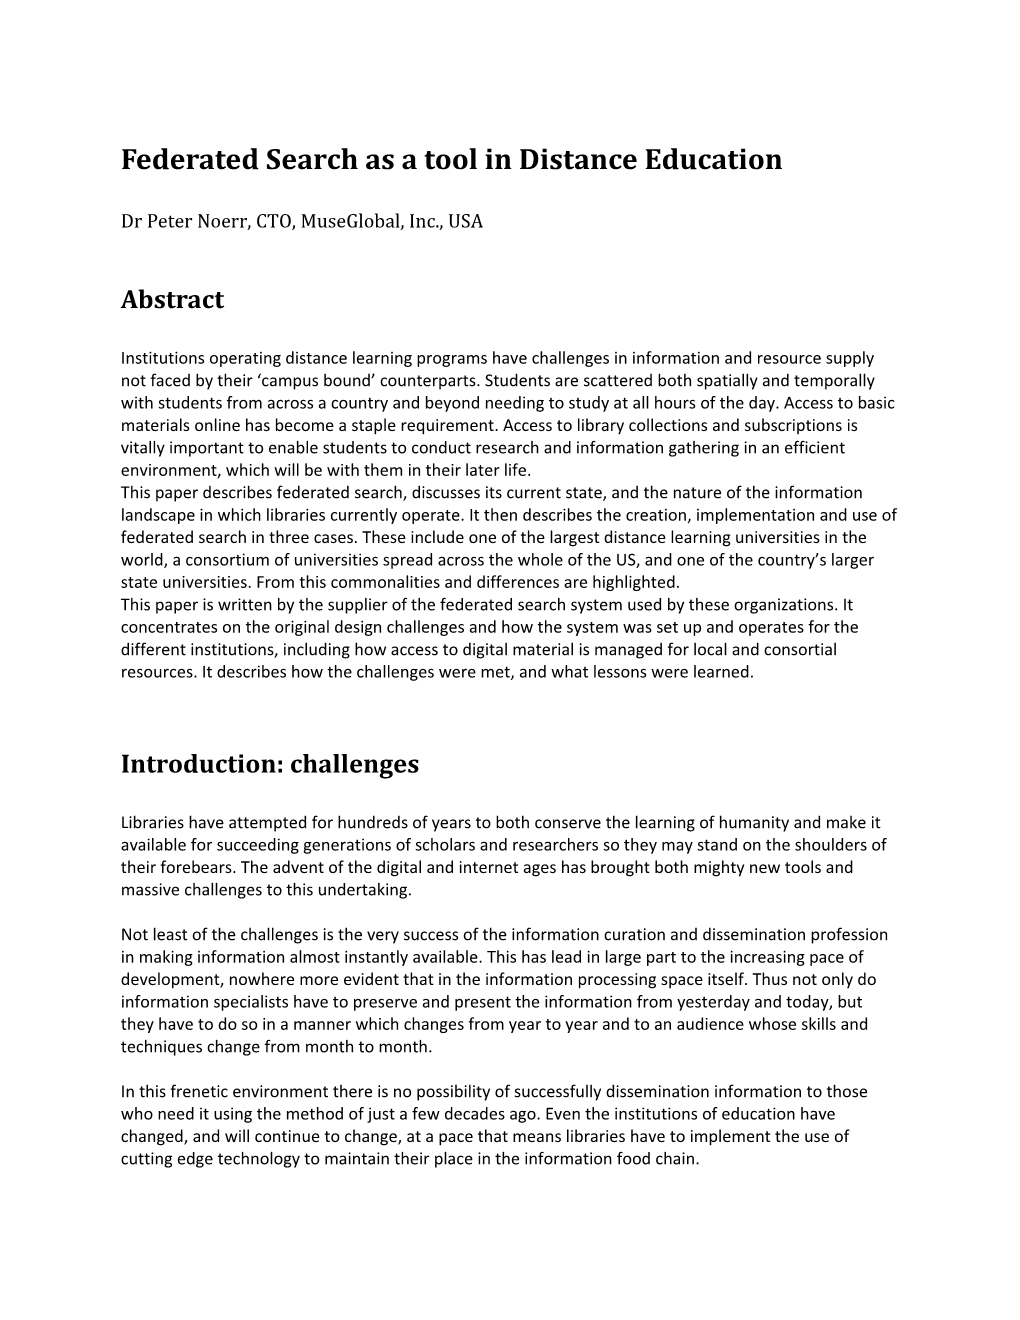 Federated Search As a Tool in Distance Education